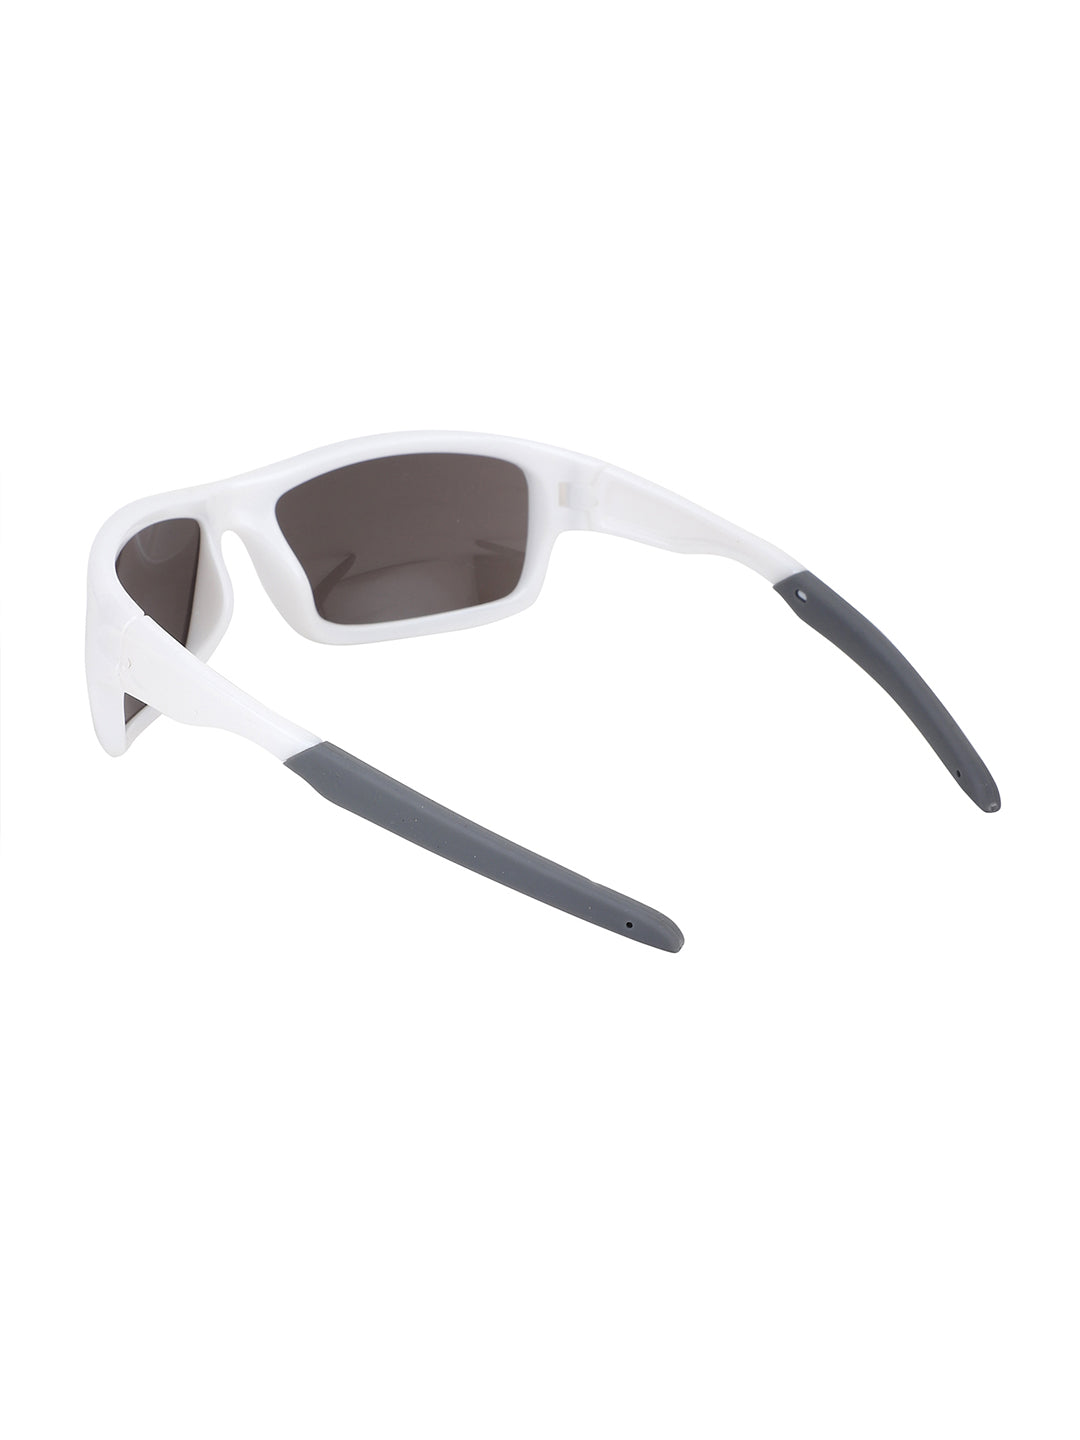 Carlton London Mirrored Lens  White Rectangle Sunglasses With Uv Protected Lens For Boy